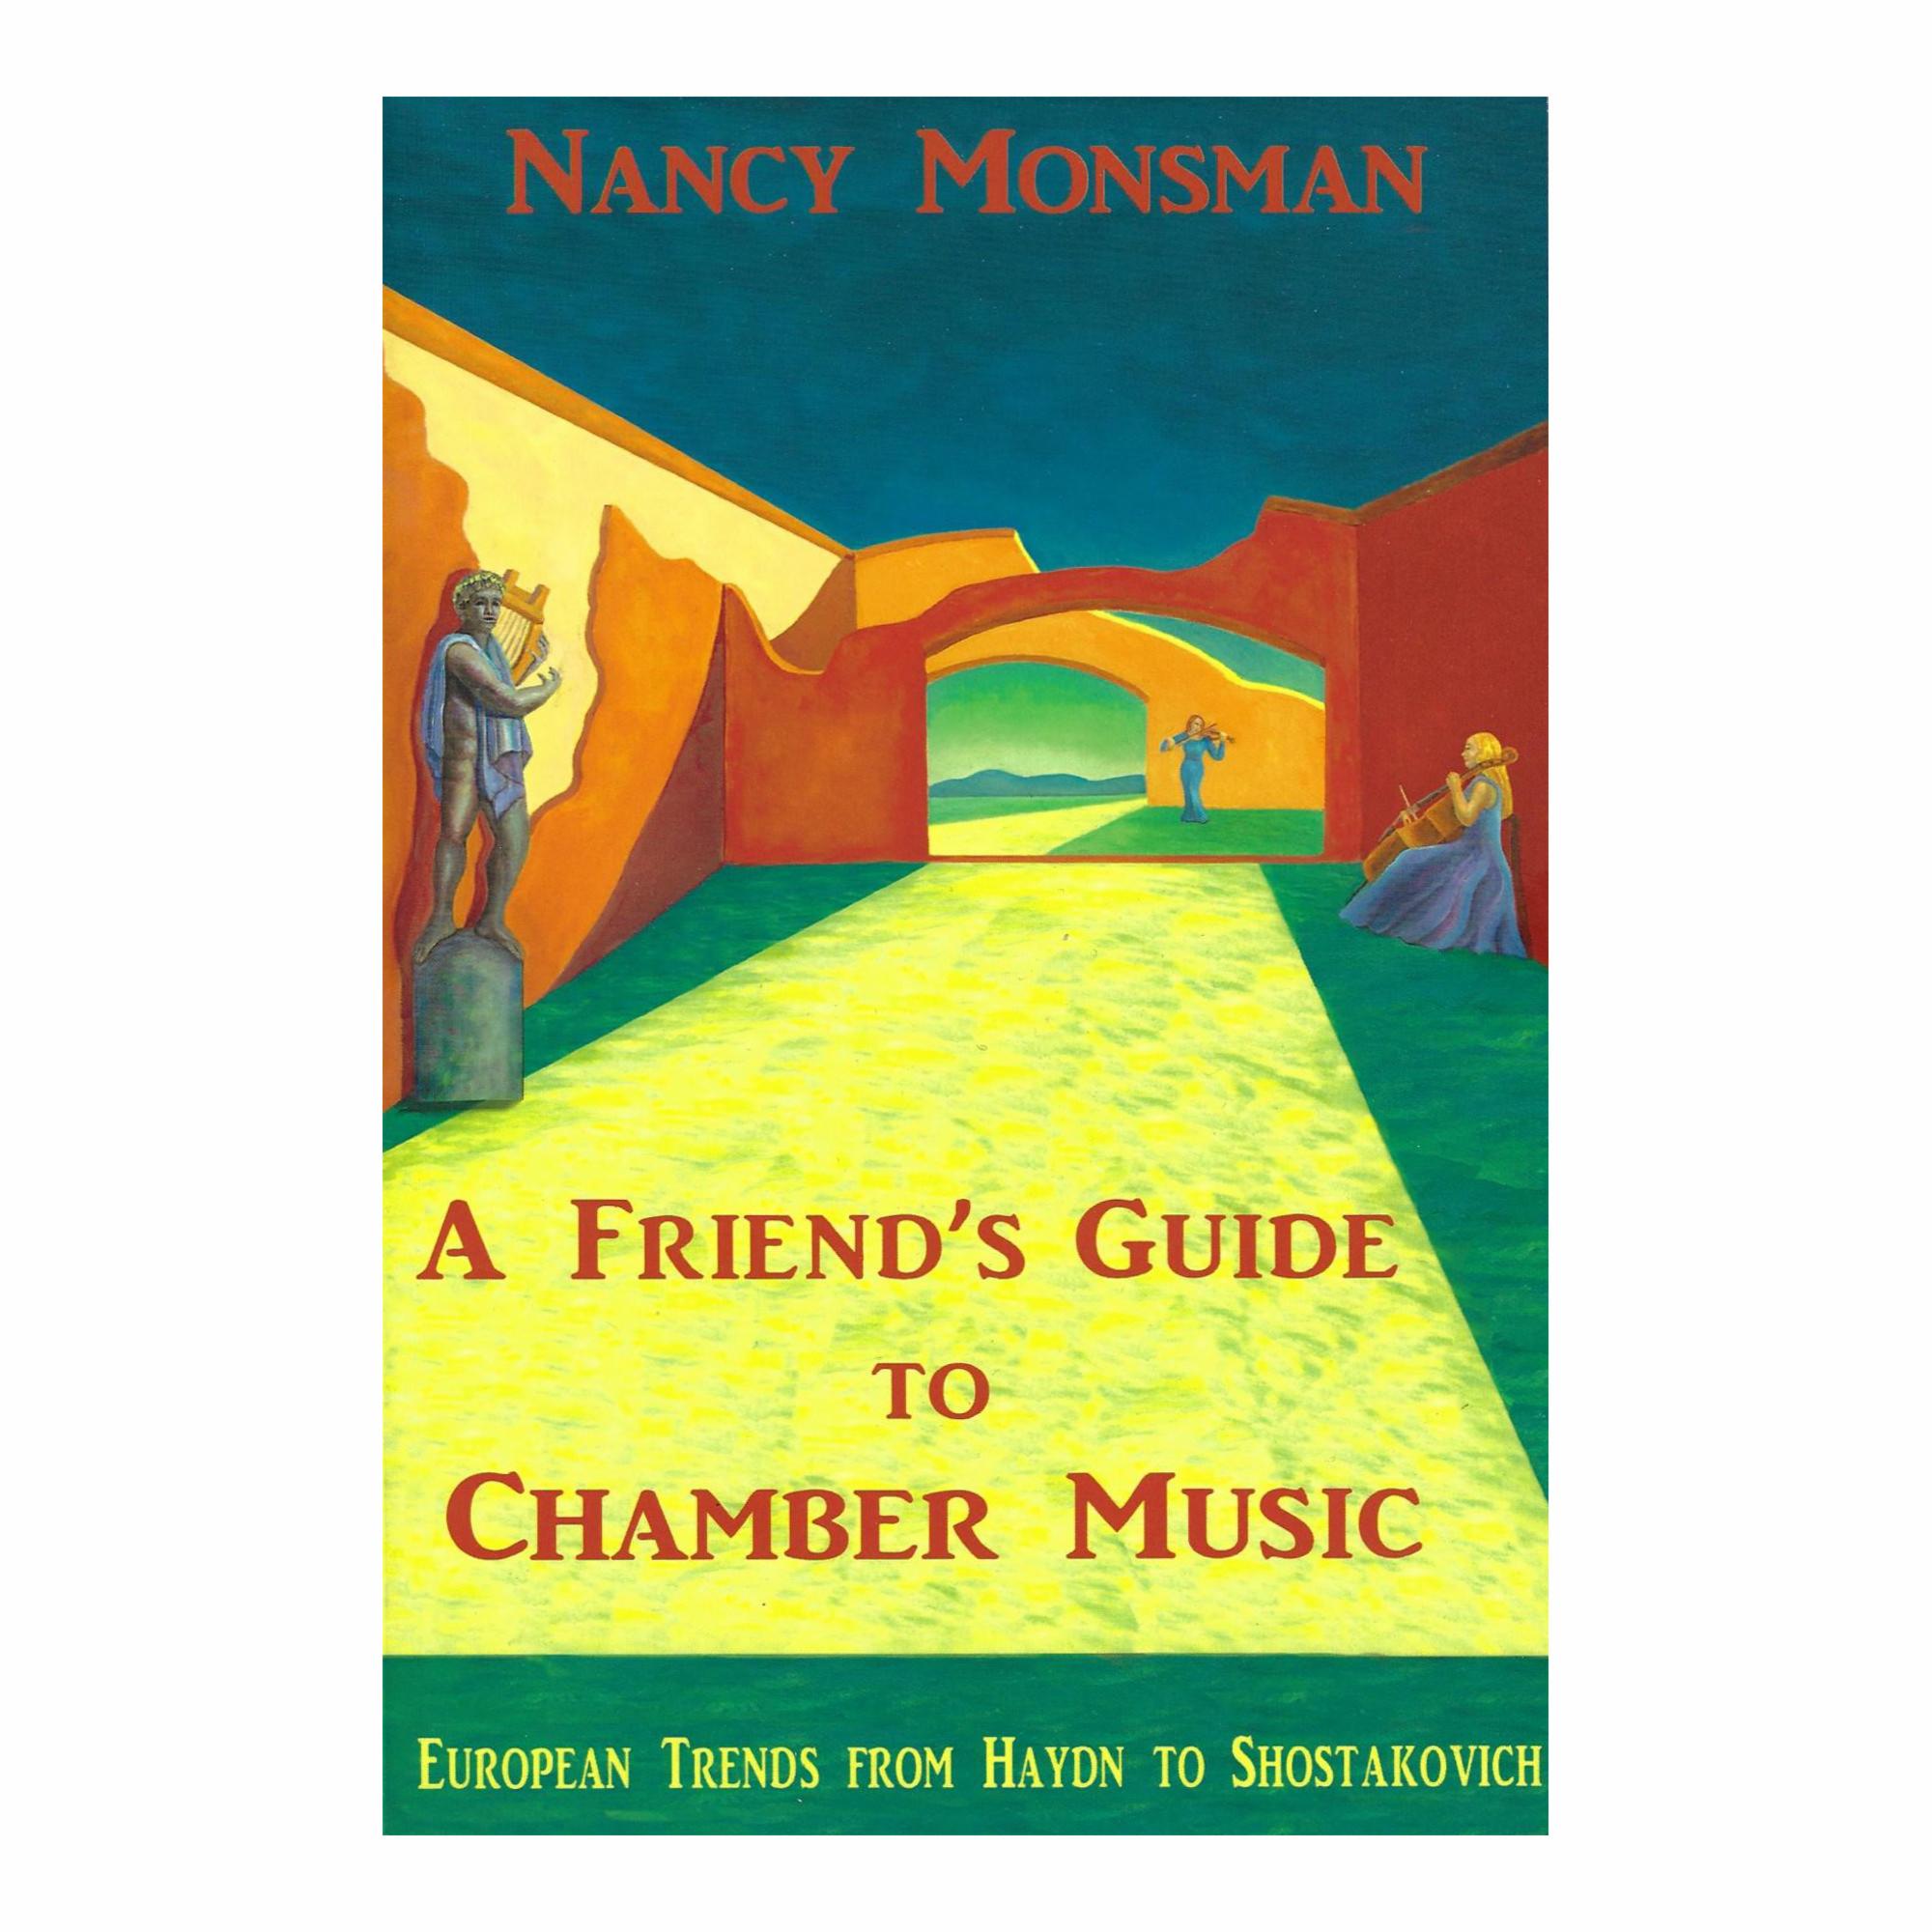 A Friend's Guide to Chamber Music